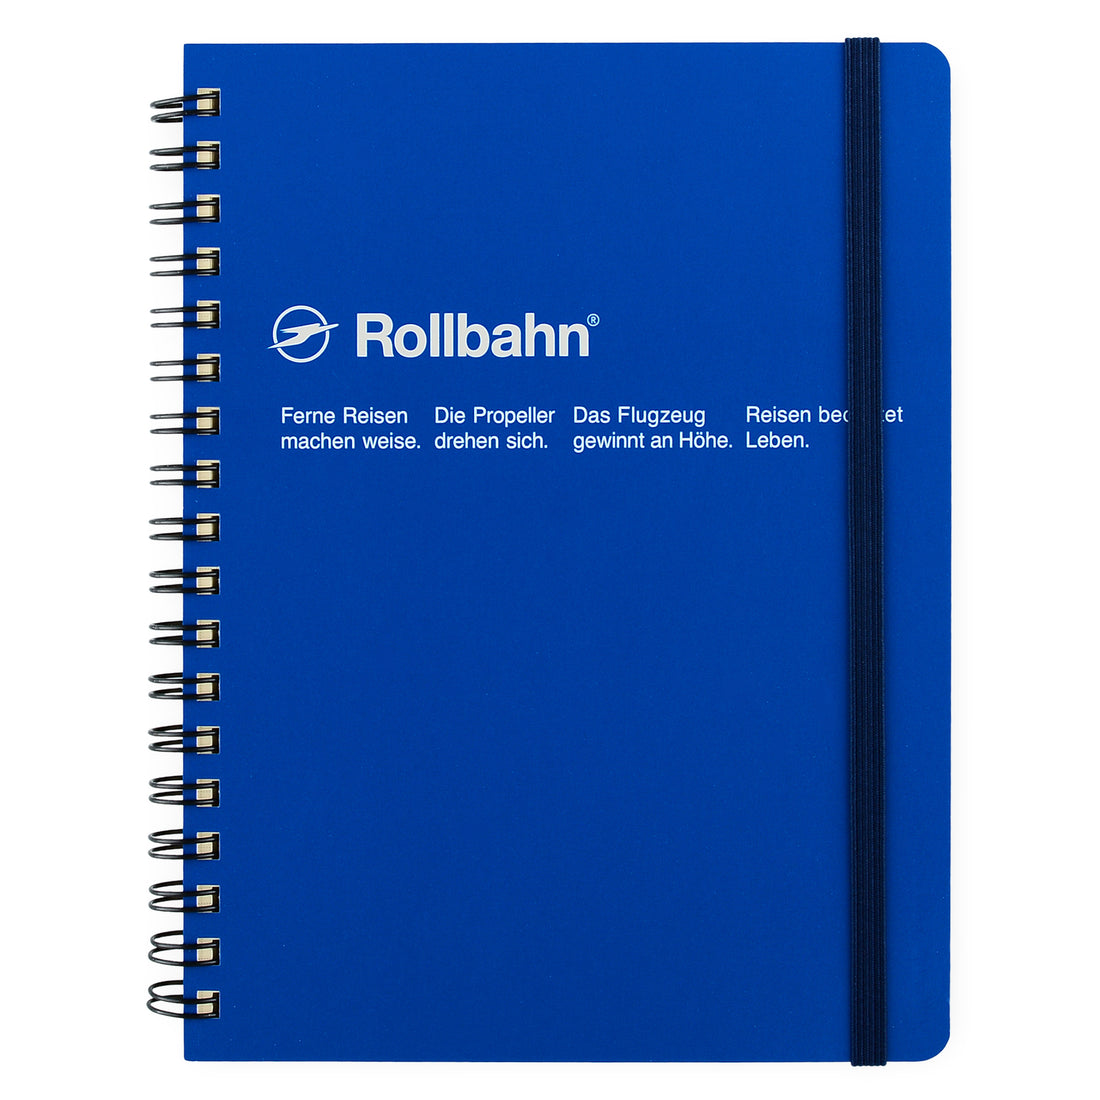 Delfonics Rollbahn Notebook Small, Large Or A5 | 9 Colors Blue / Small (4.5 x 5.5")